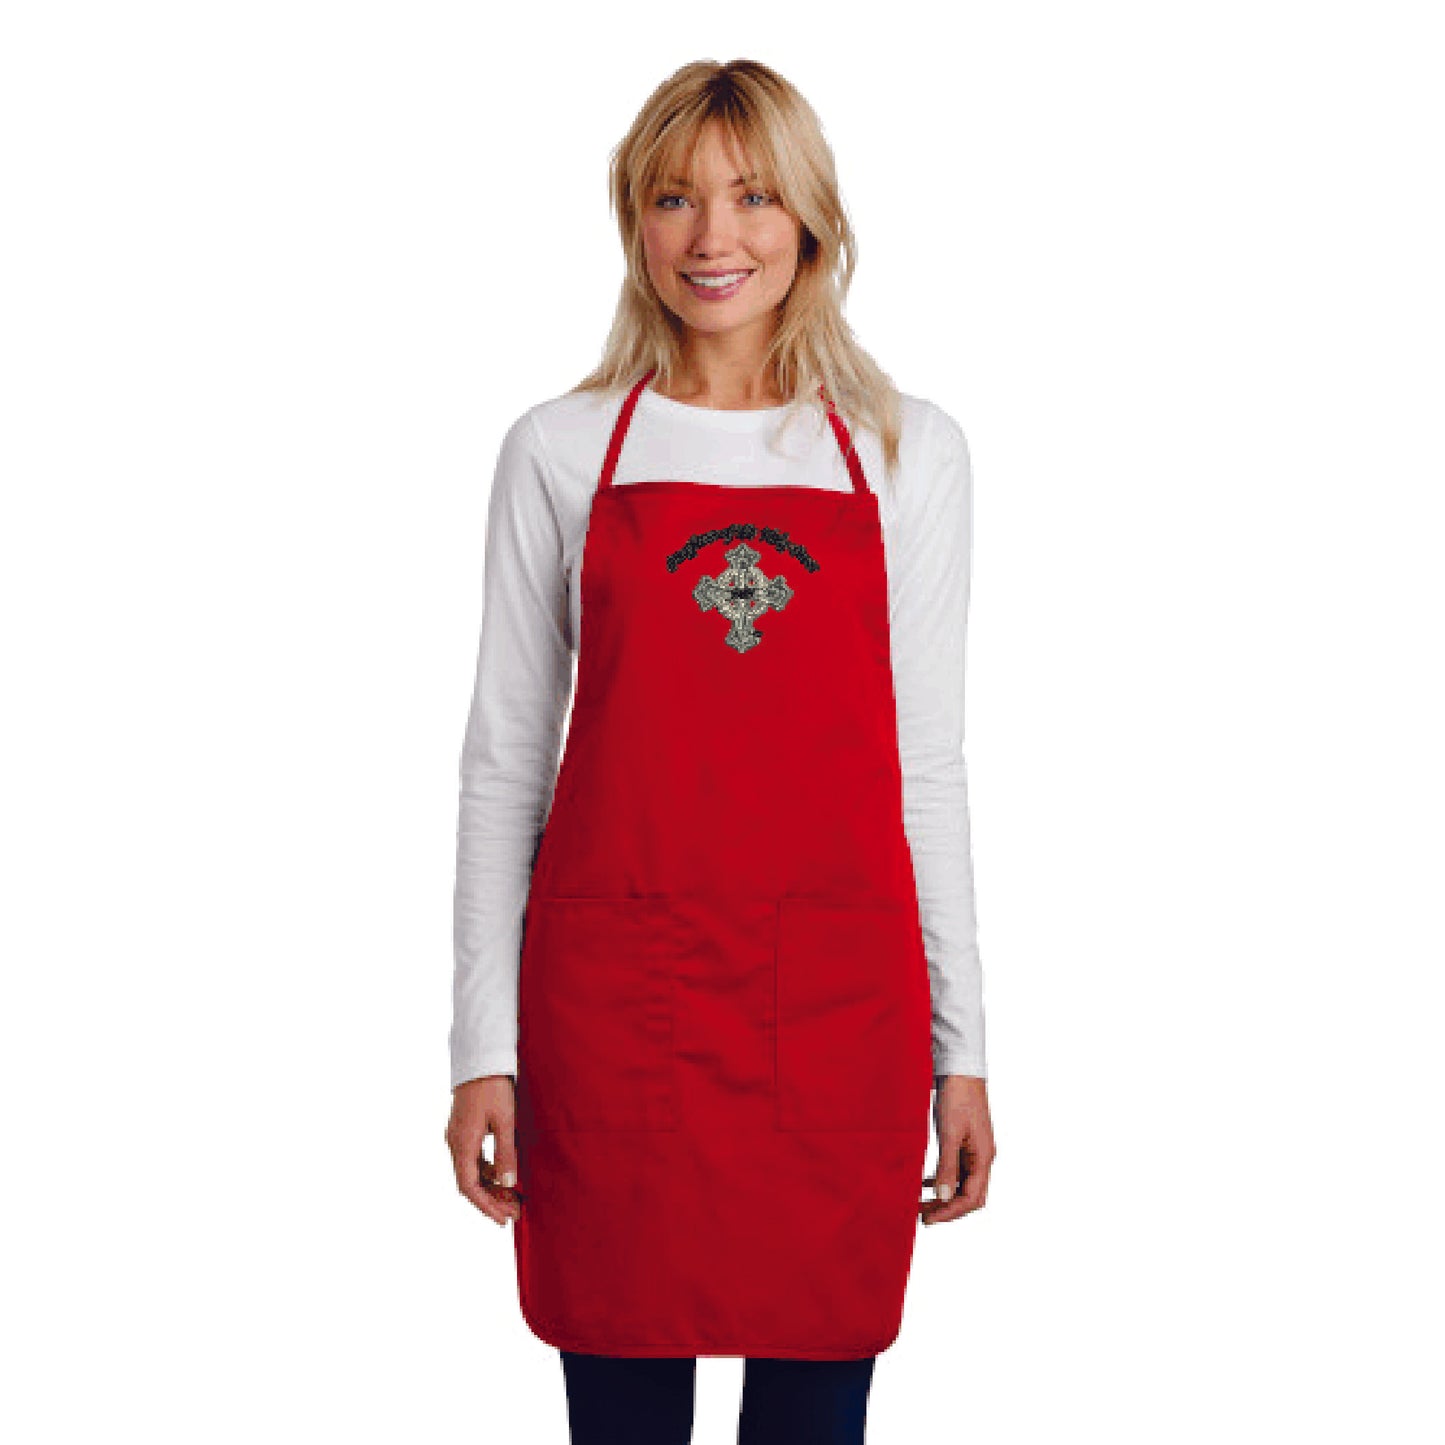 Daughters of the Holy Cross Apron